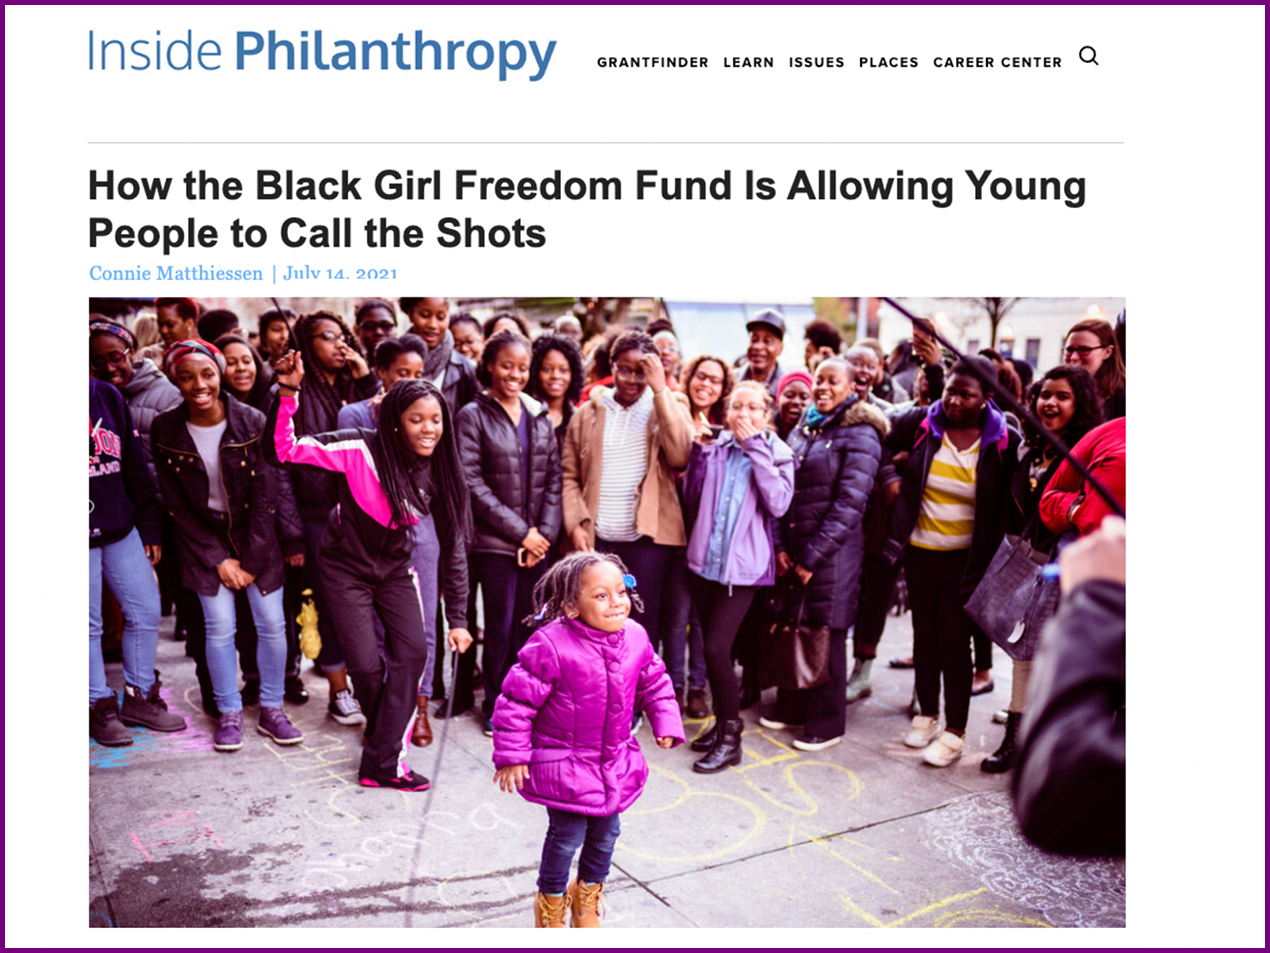 Inside Philanthropy feature: How the Black Girl Freedom Fund Is Allowing Young People to Call the Shots